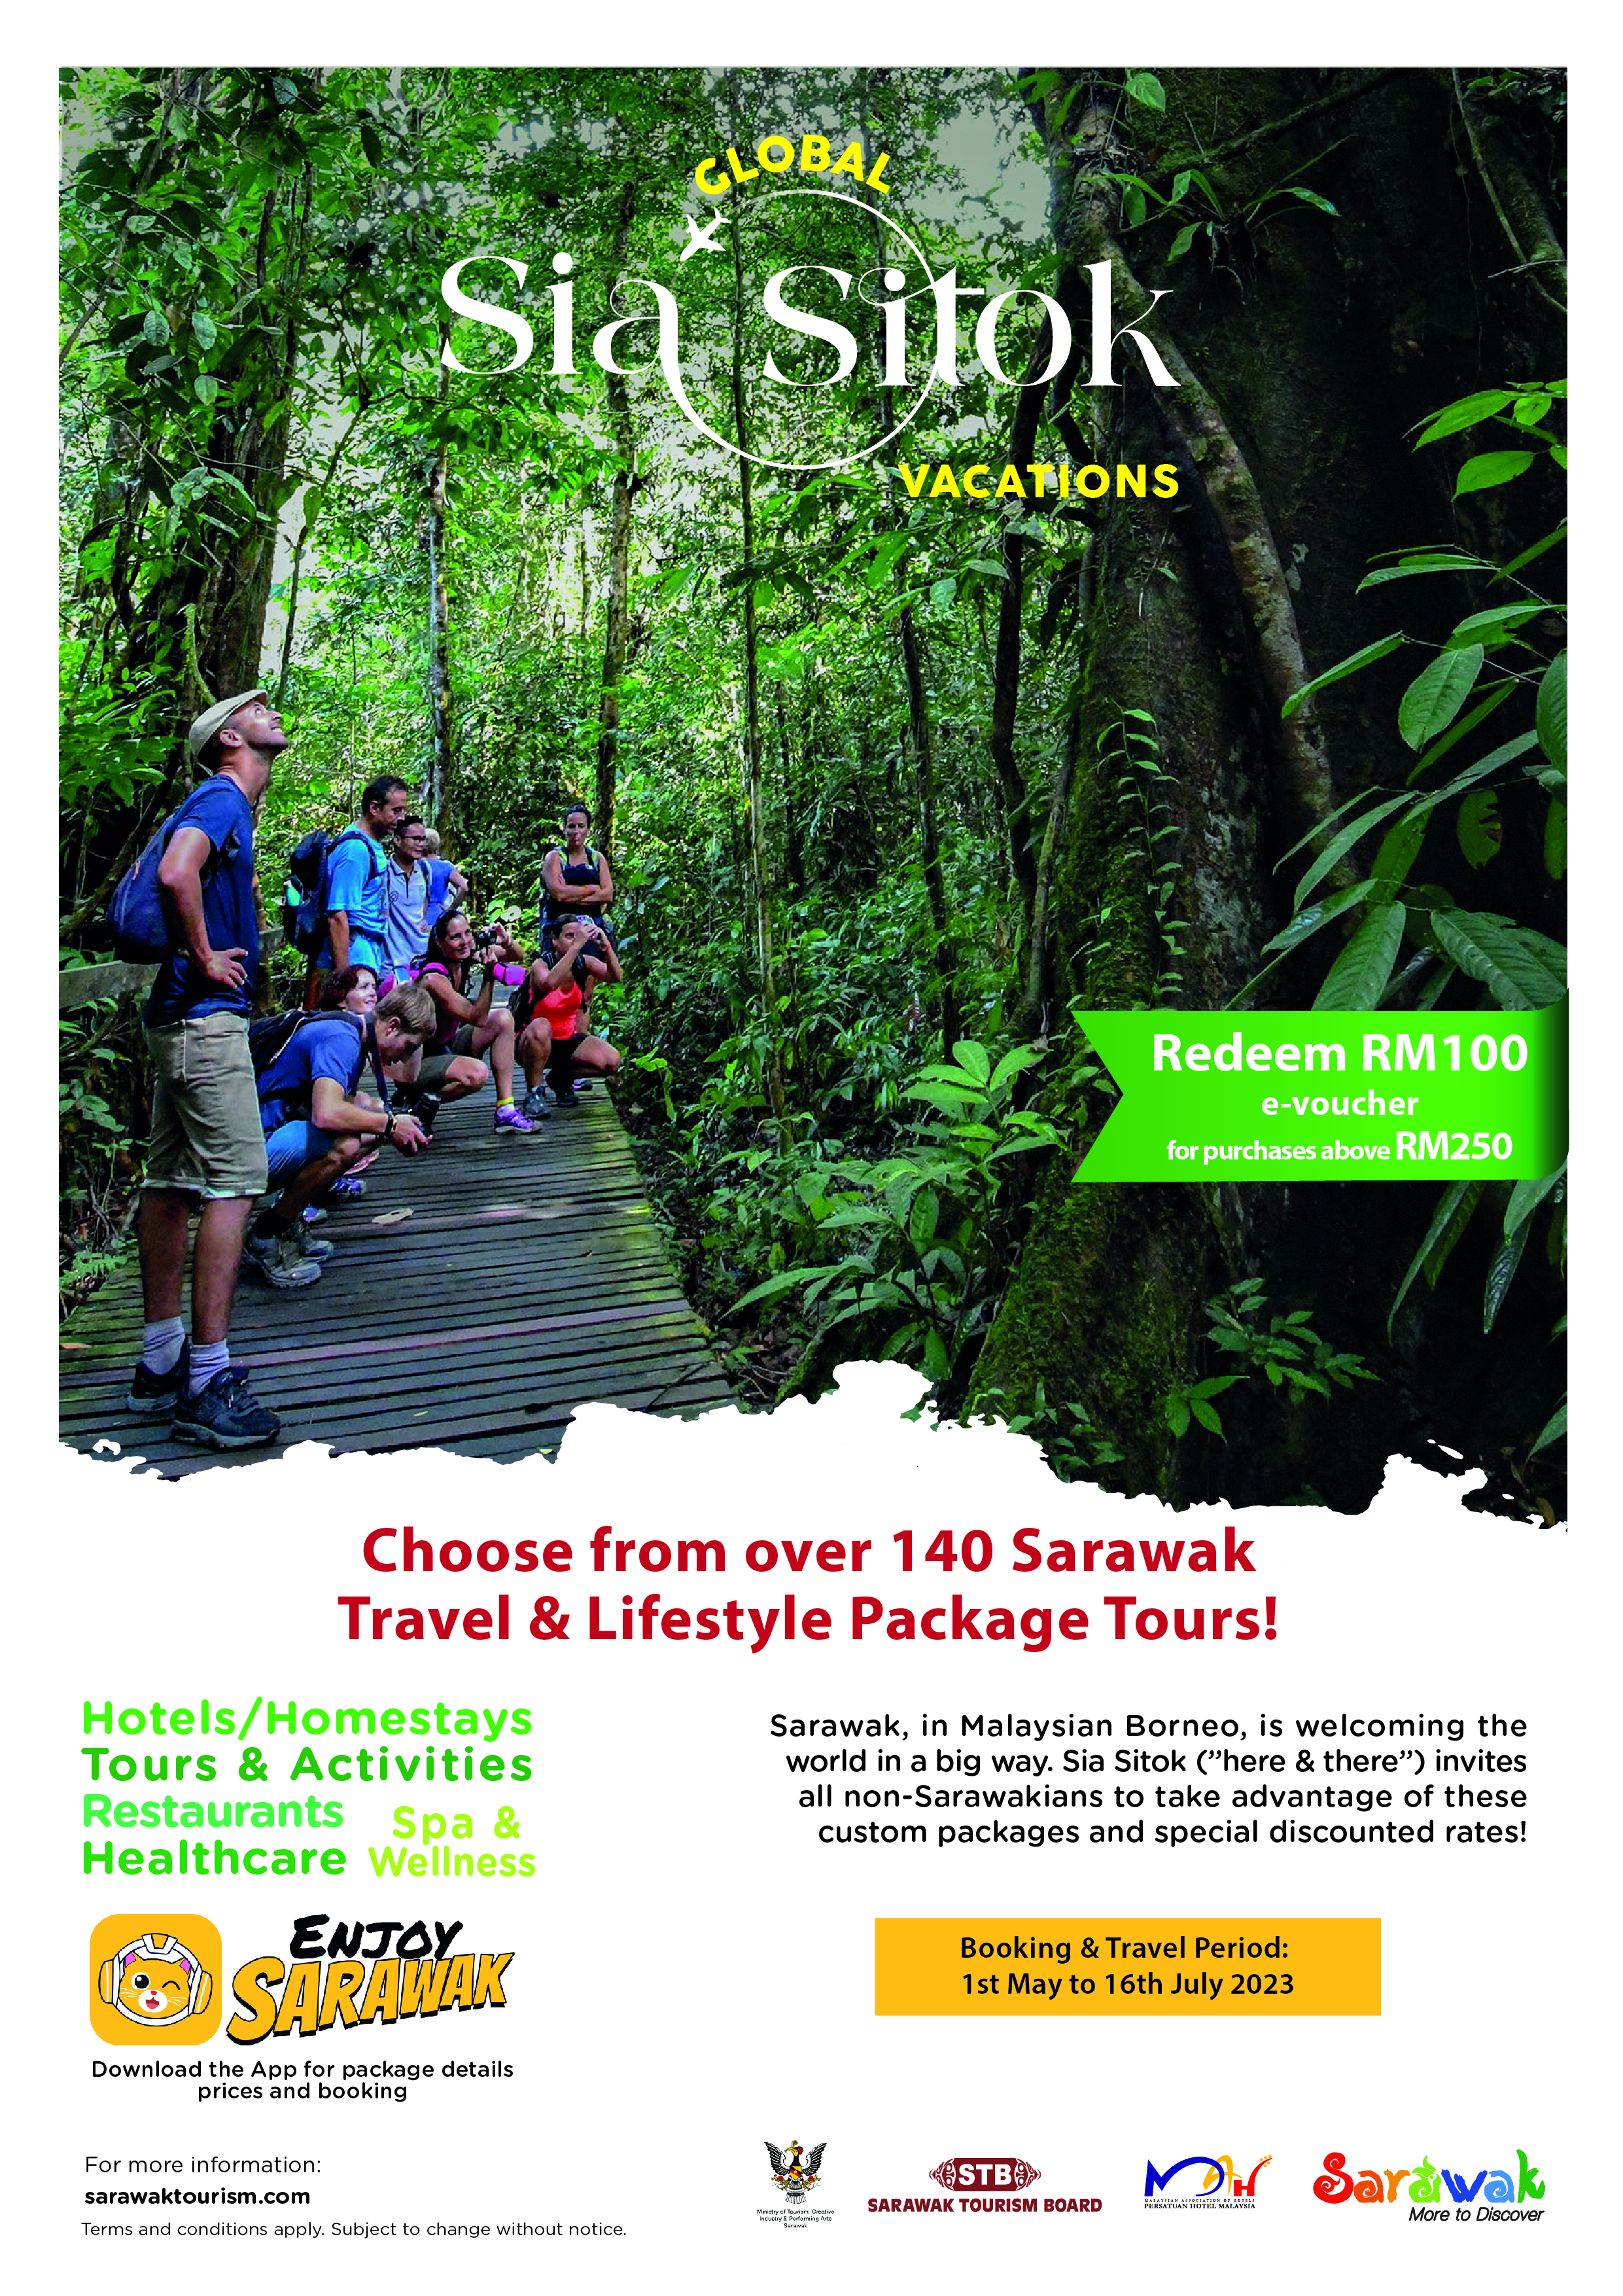 Unforgettable Getaways in Sarawak with Global Sia Sitok Vacations